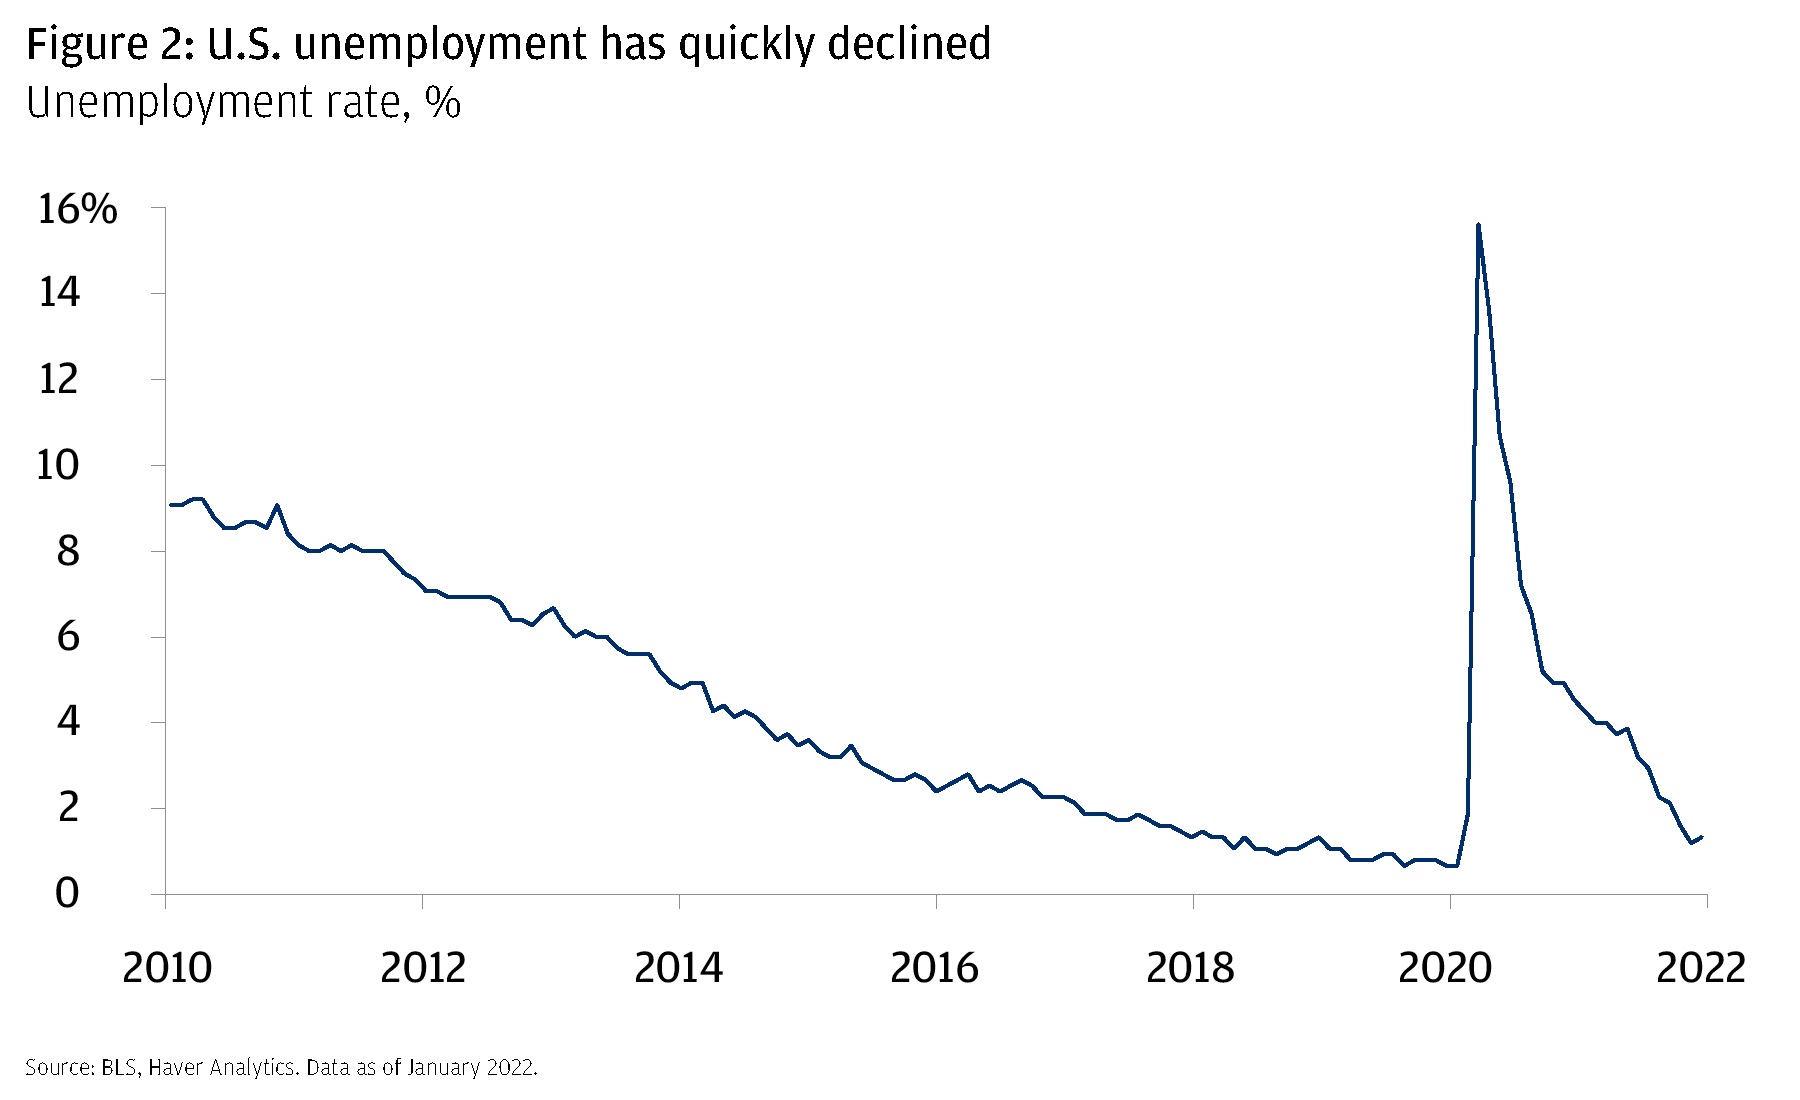 US unemployment rate % showing unemployment declining from 10% at 2010 to about 5% in 2022.